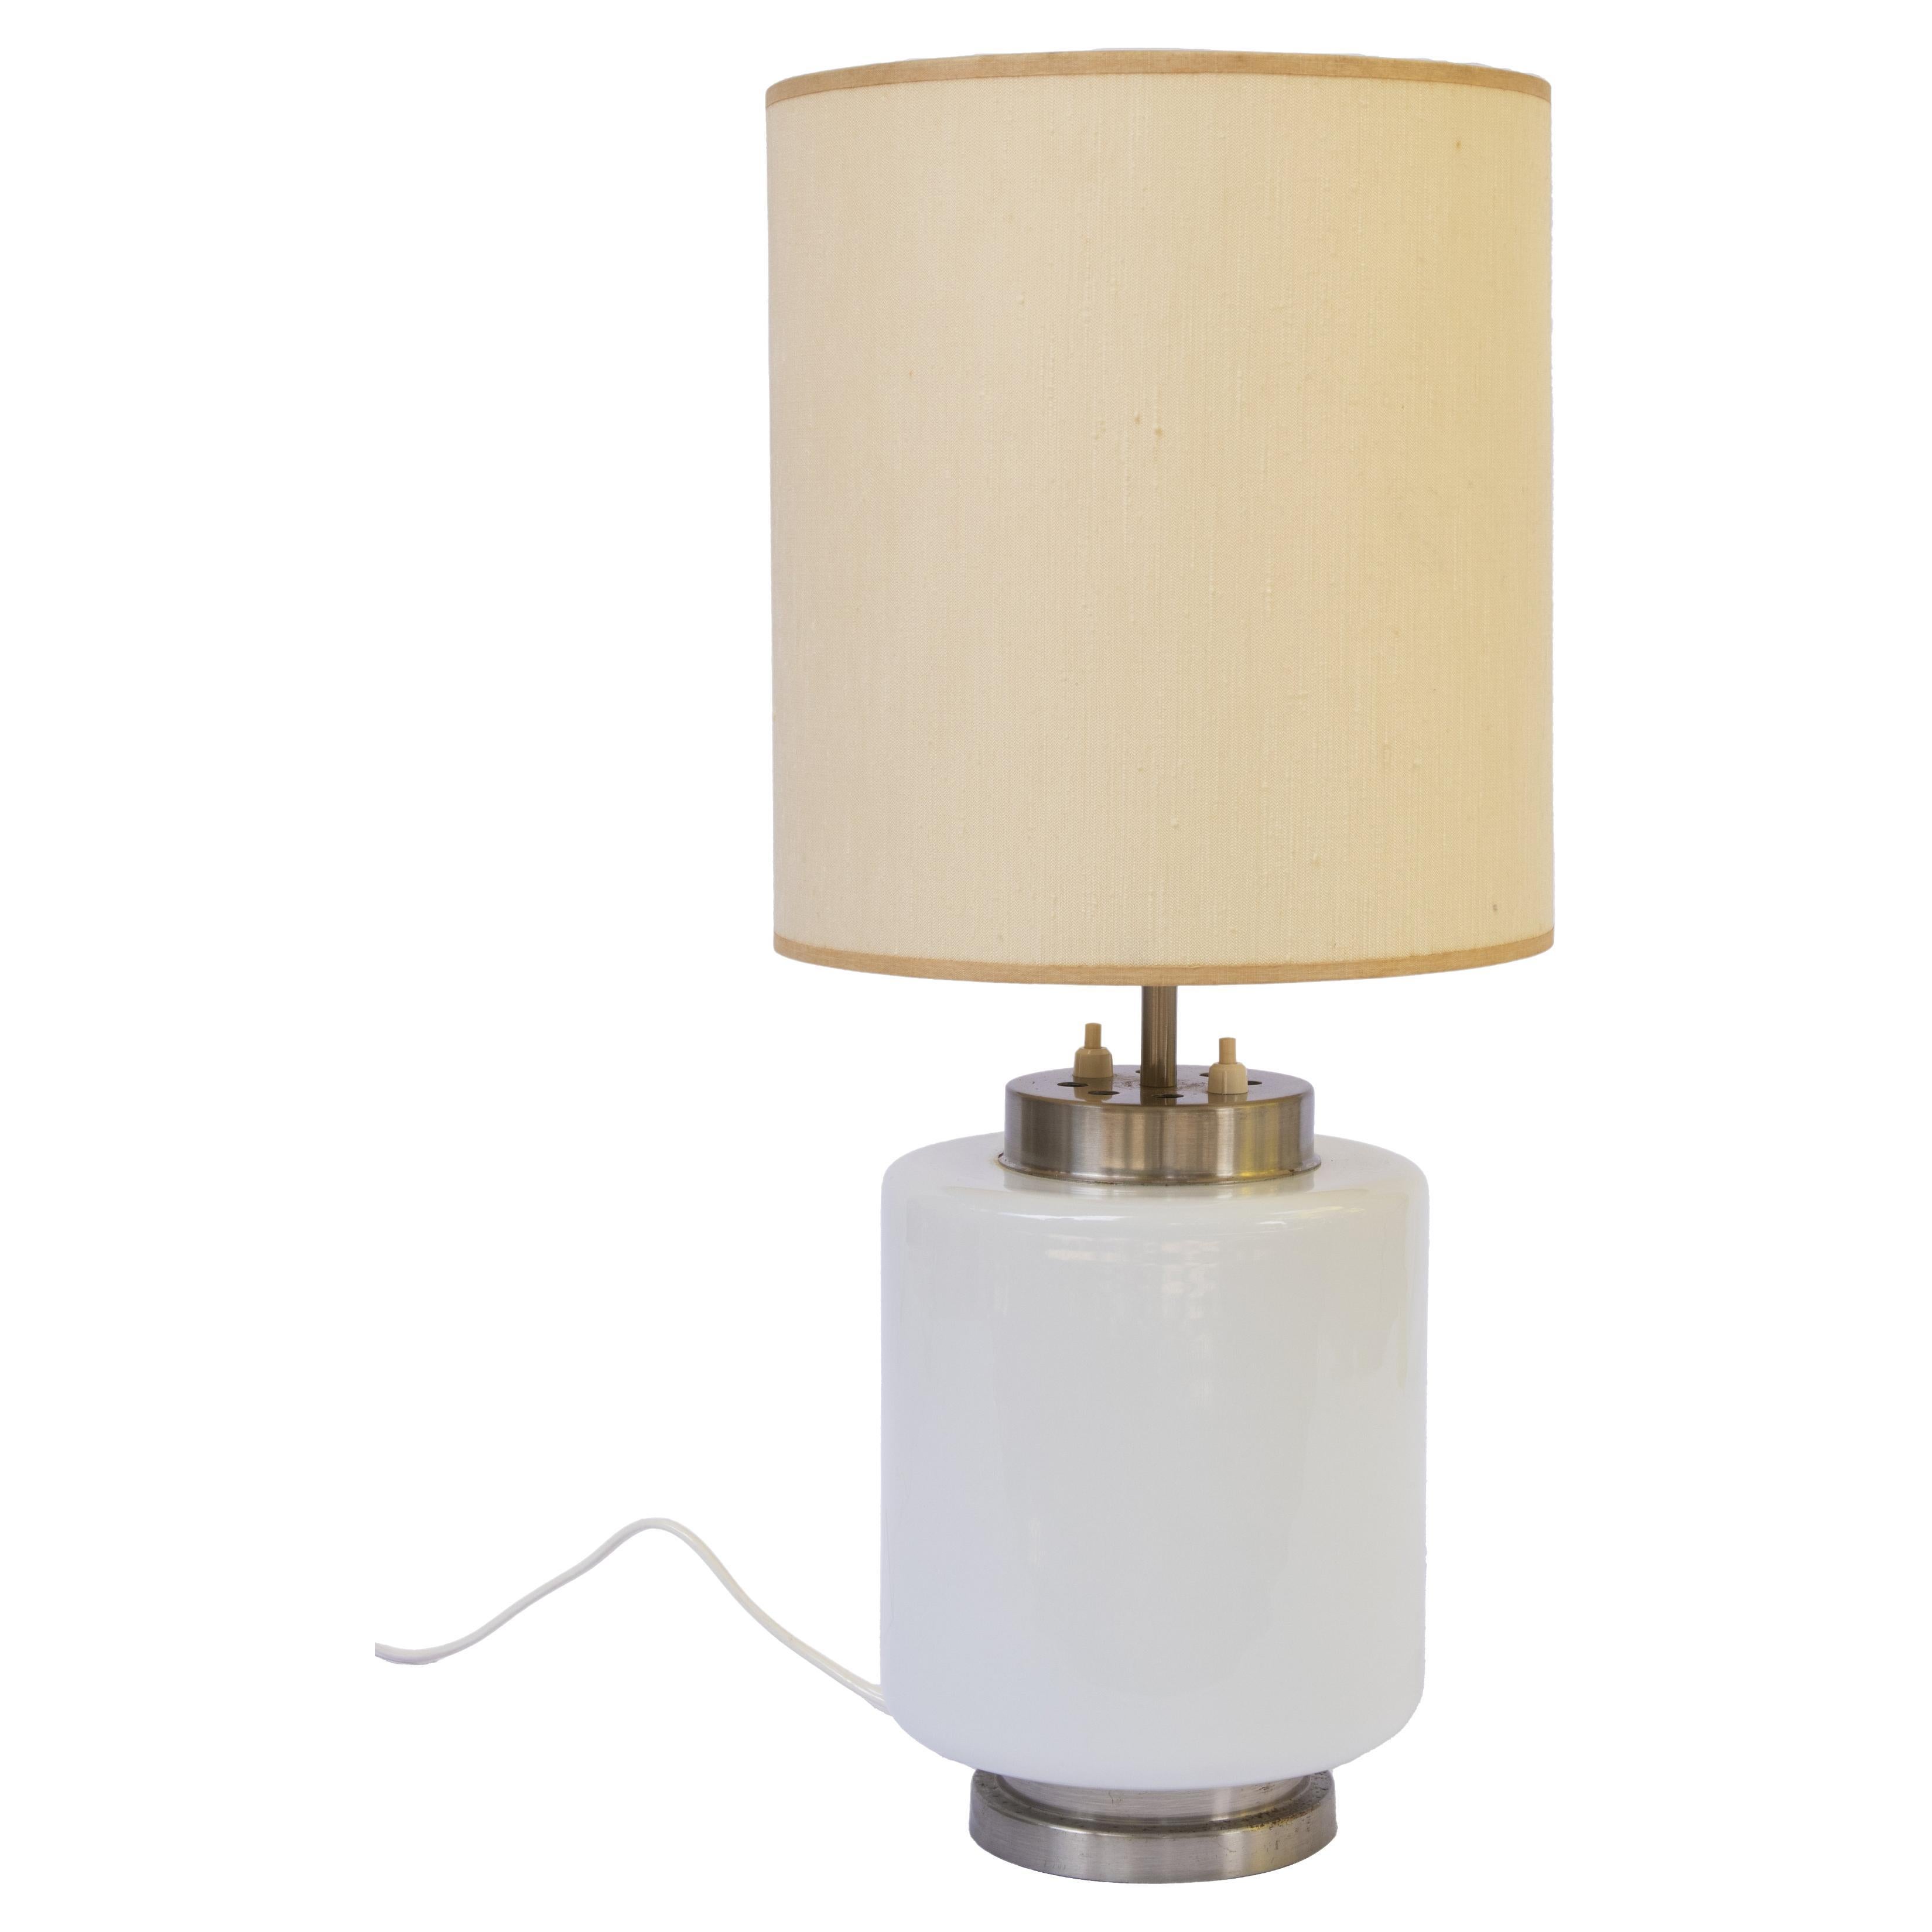 Vintage Table Lamp by Stilnovo, Italy 1960s. For Sale